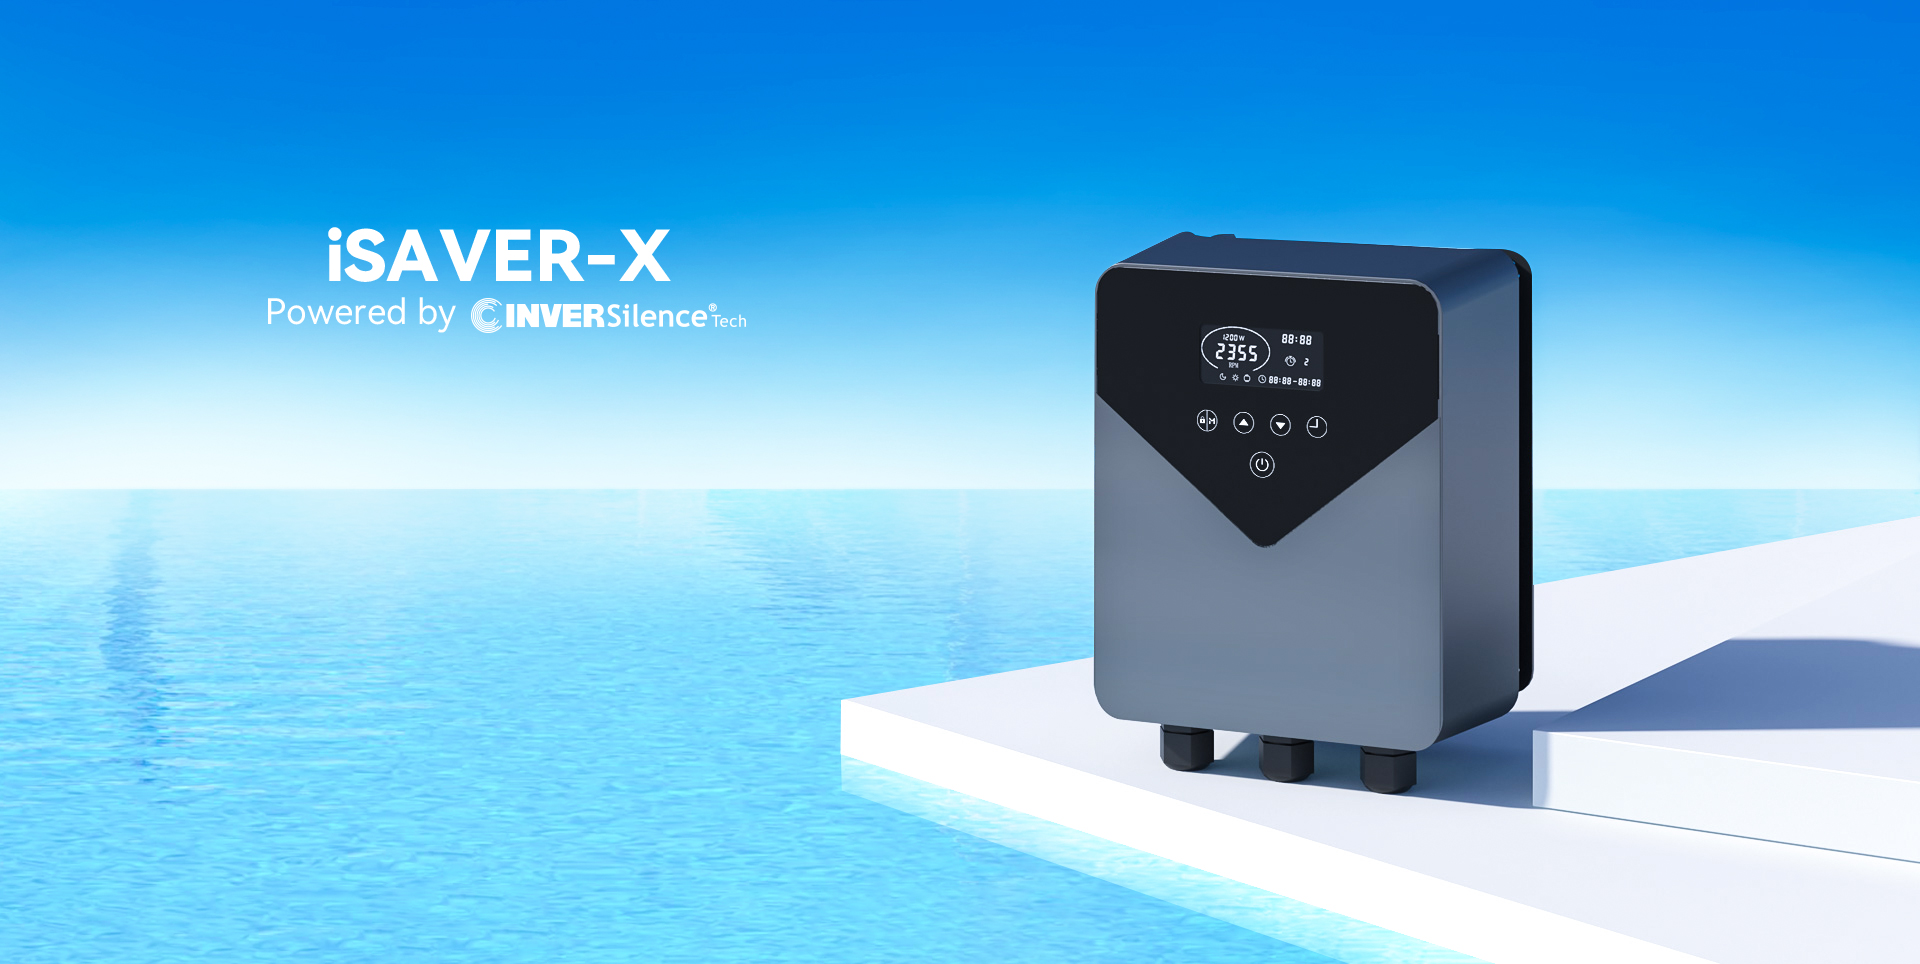 iSAVER-X - Aquagem Pool Pump Frequency Inverter Powered by inversilence technology